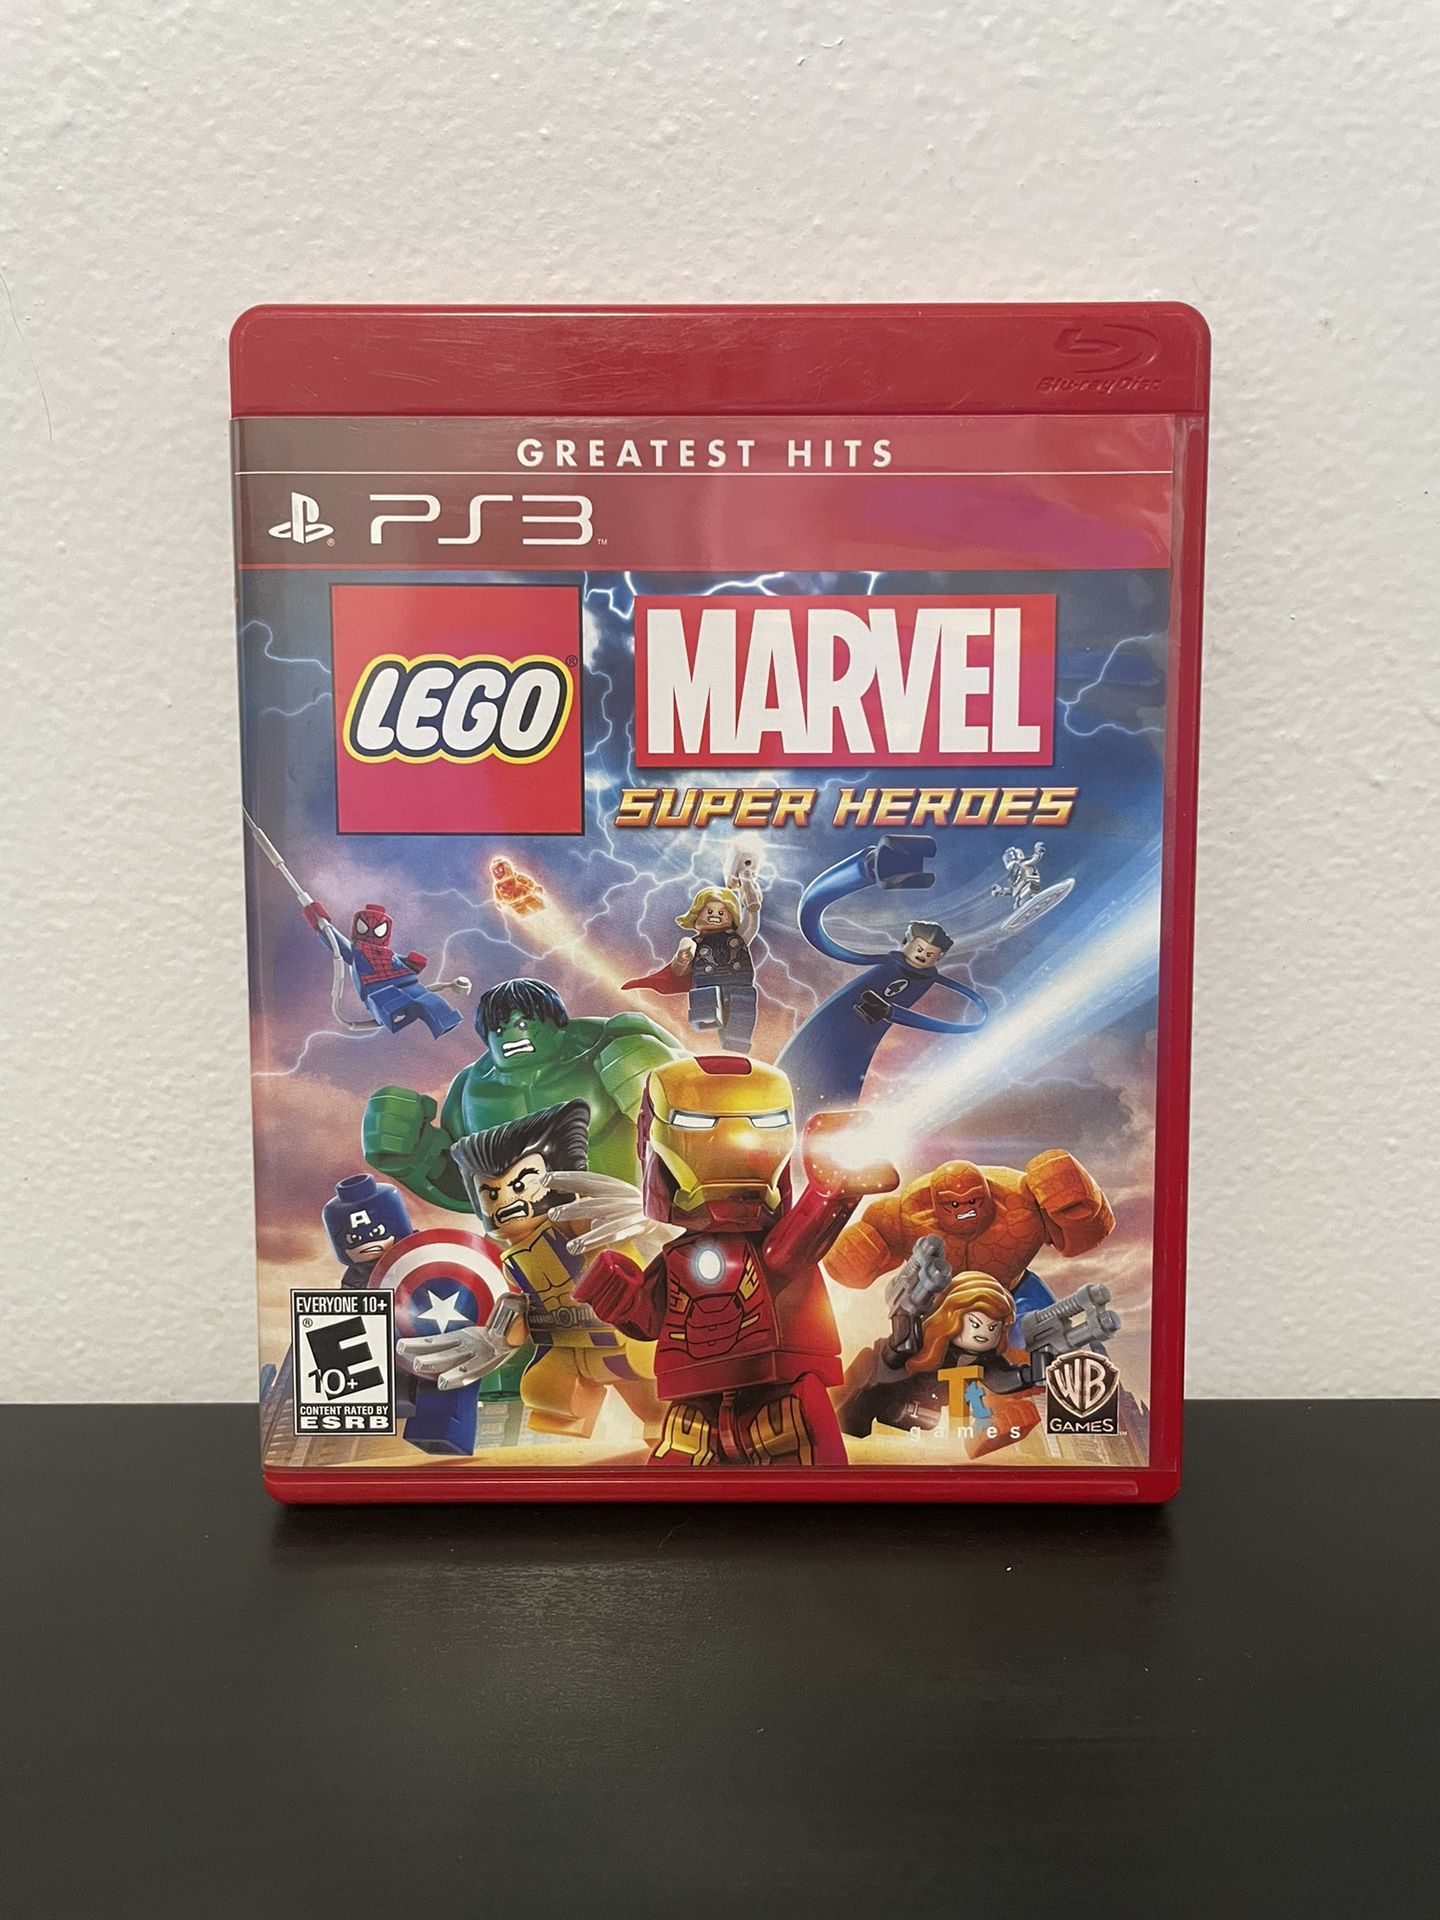 LEGO Marvel Super Heroes PS3 PlayStation 3 Like New CIB Greatest Hits Game